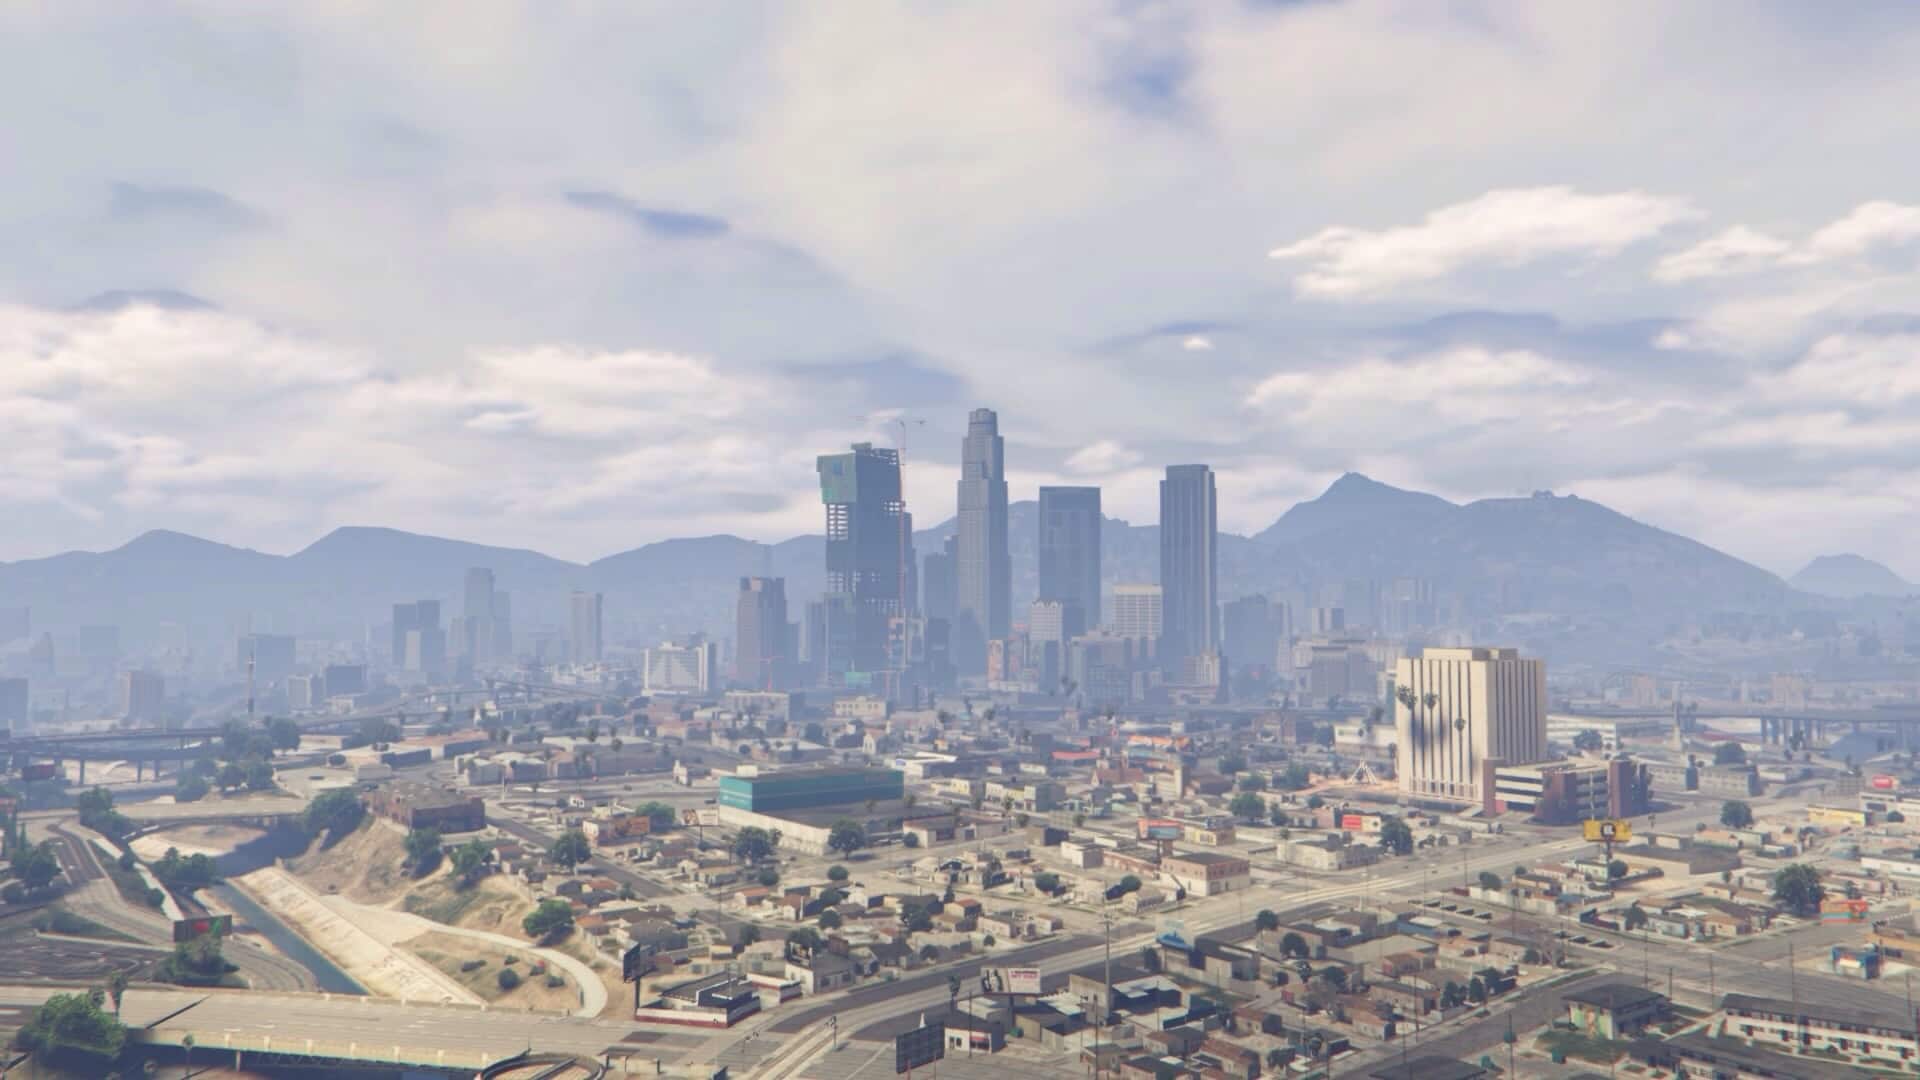 The Real Landmarks Of Grand Theft Auto 5's Los Santos